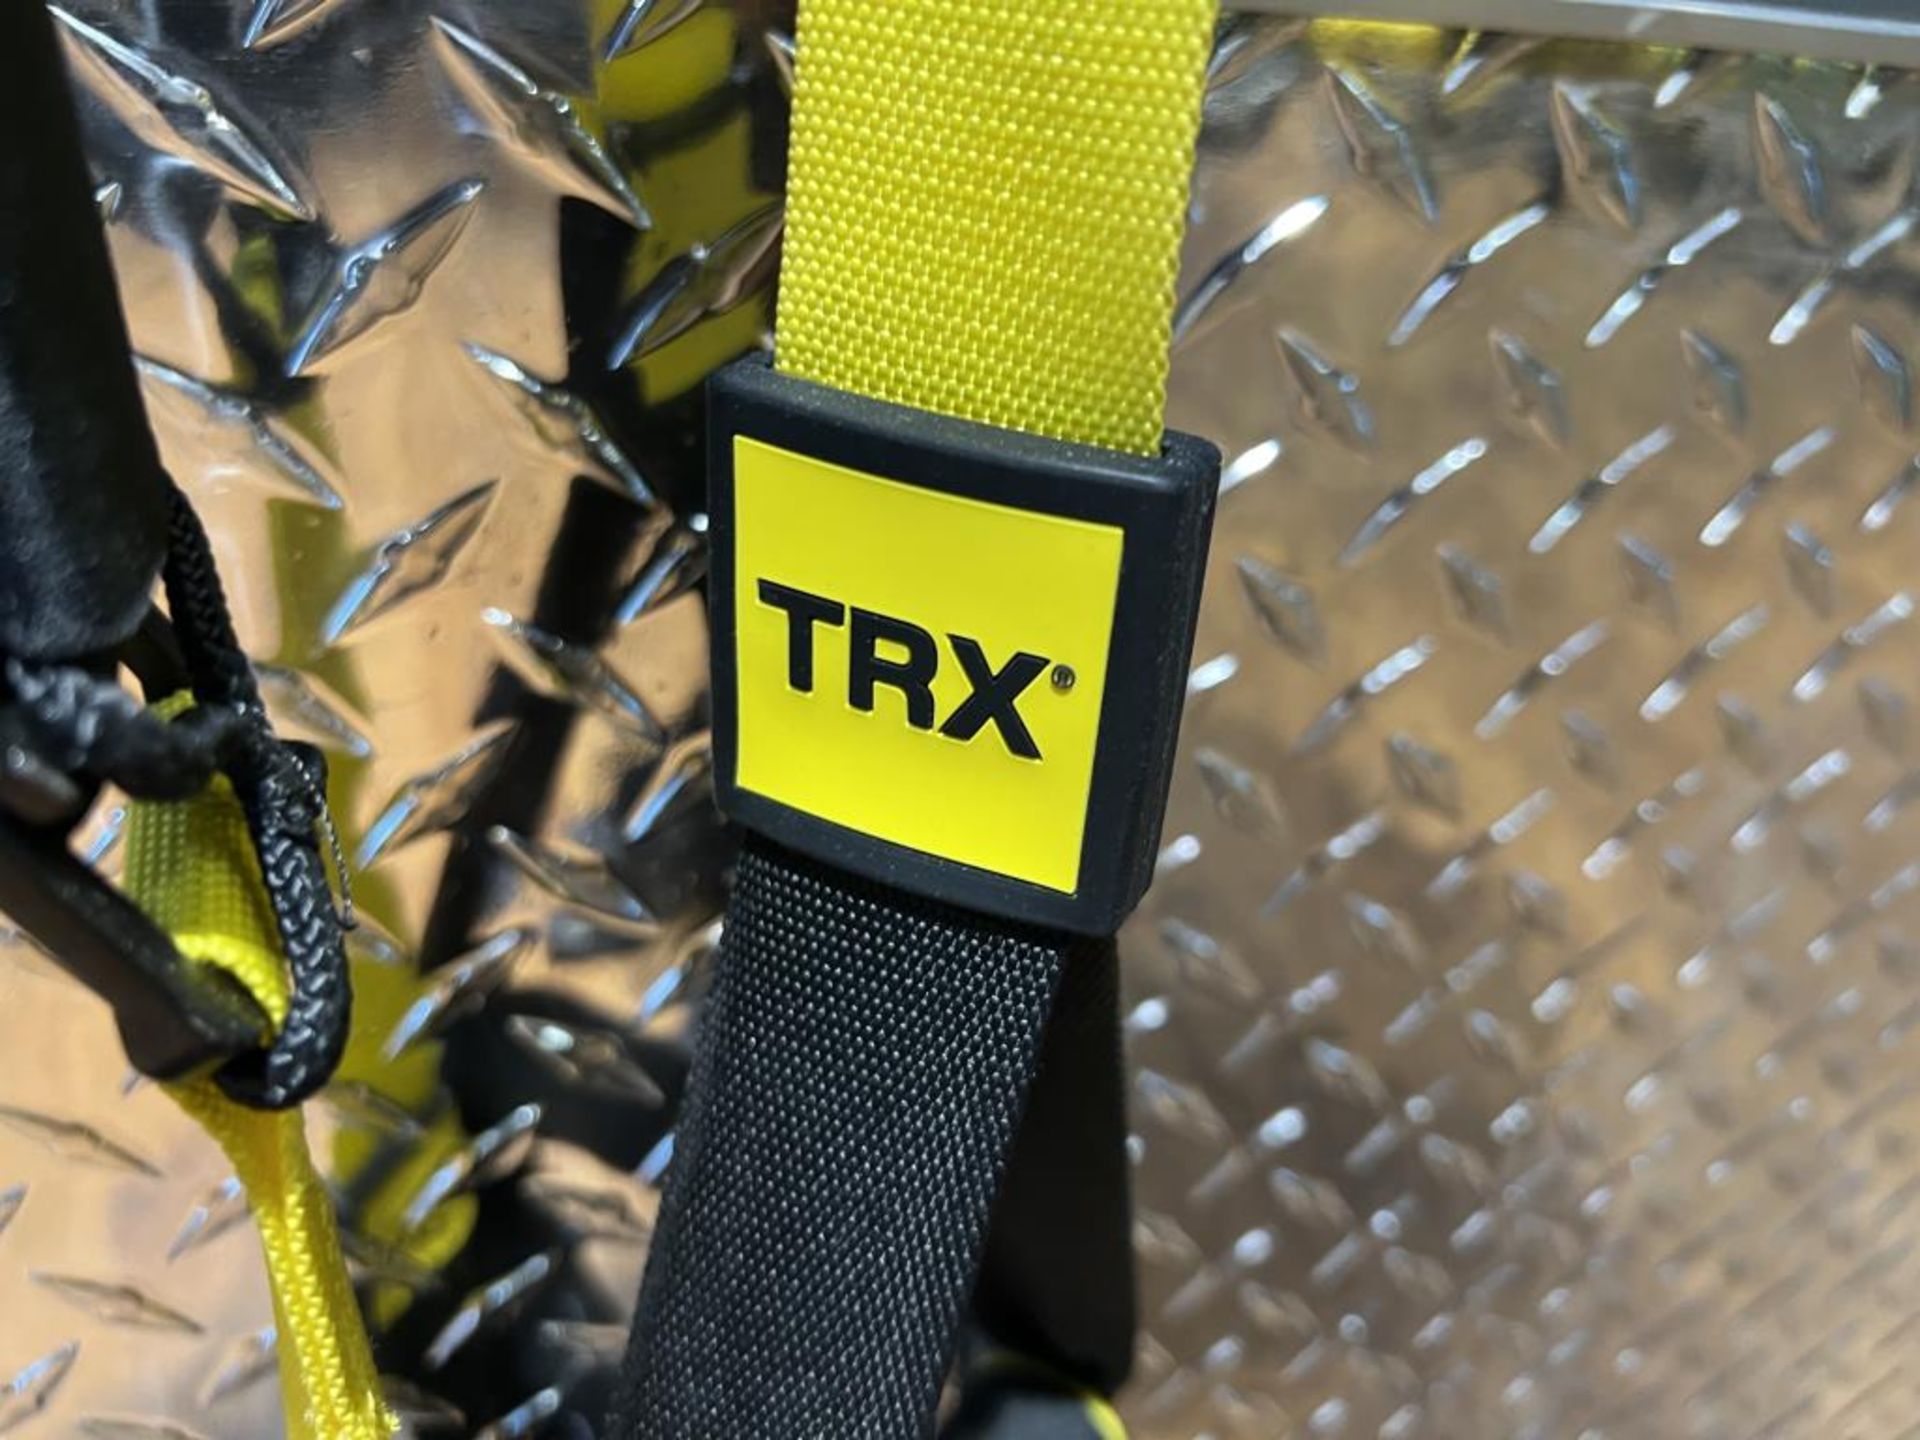 TRX Strength Bands - Image 4 of 4